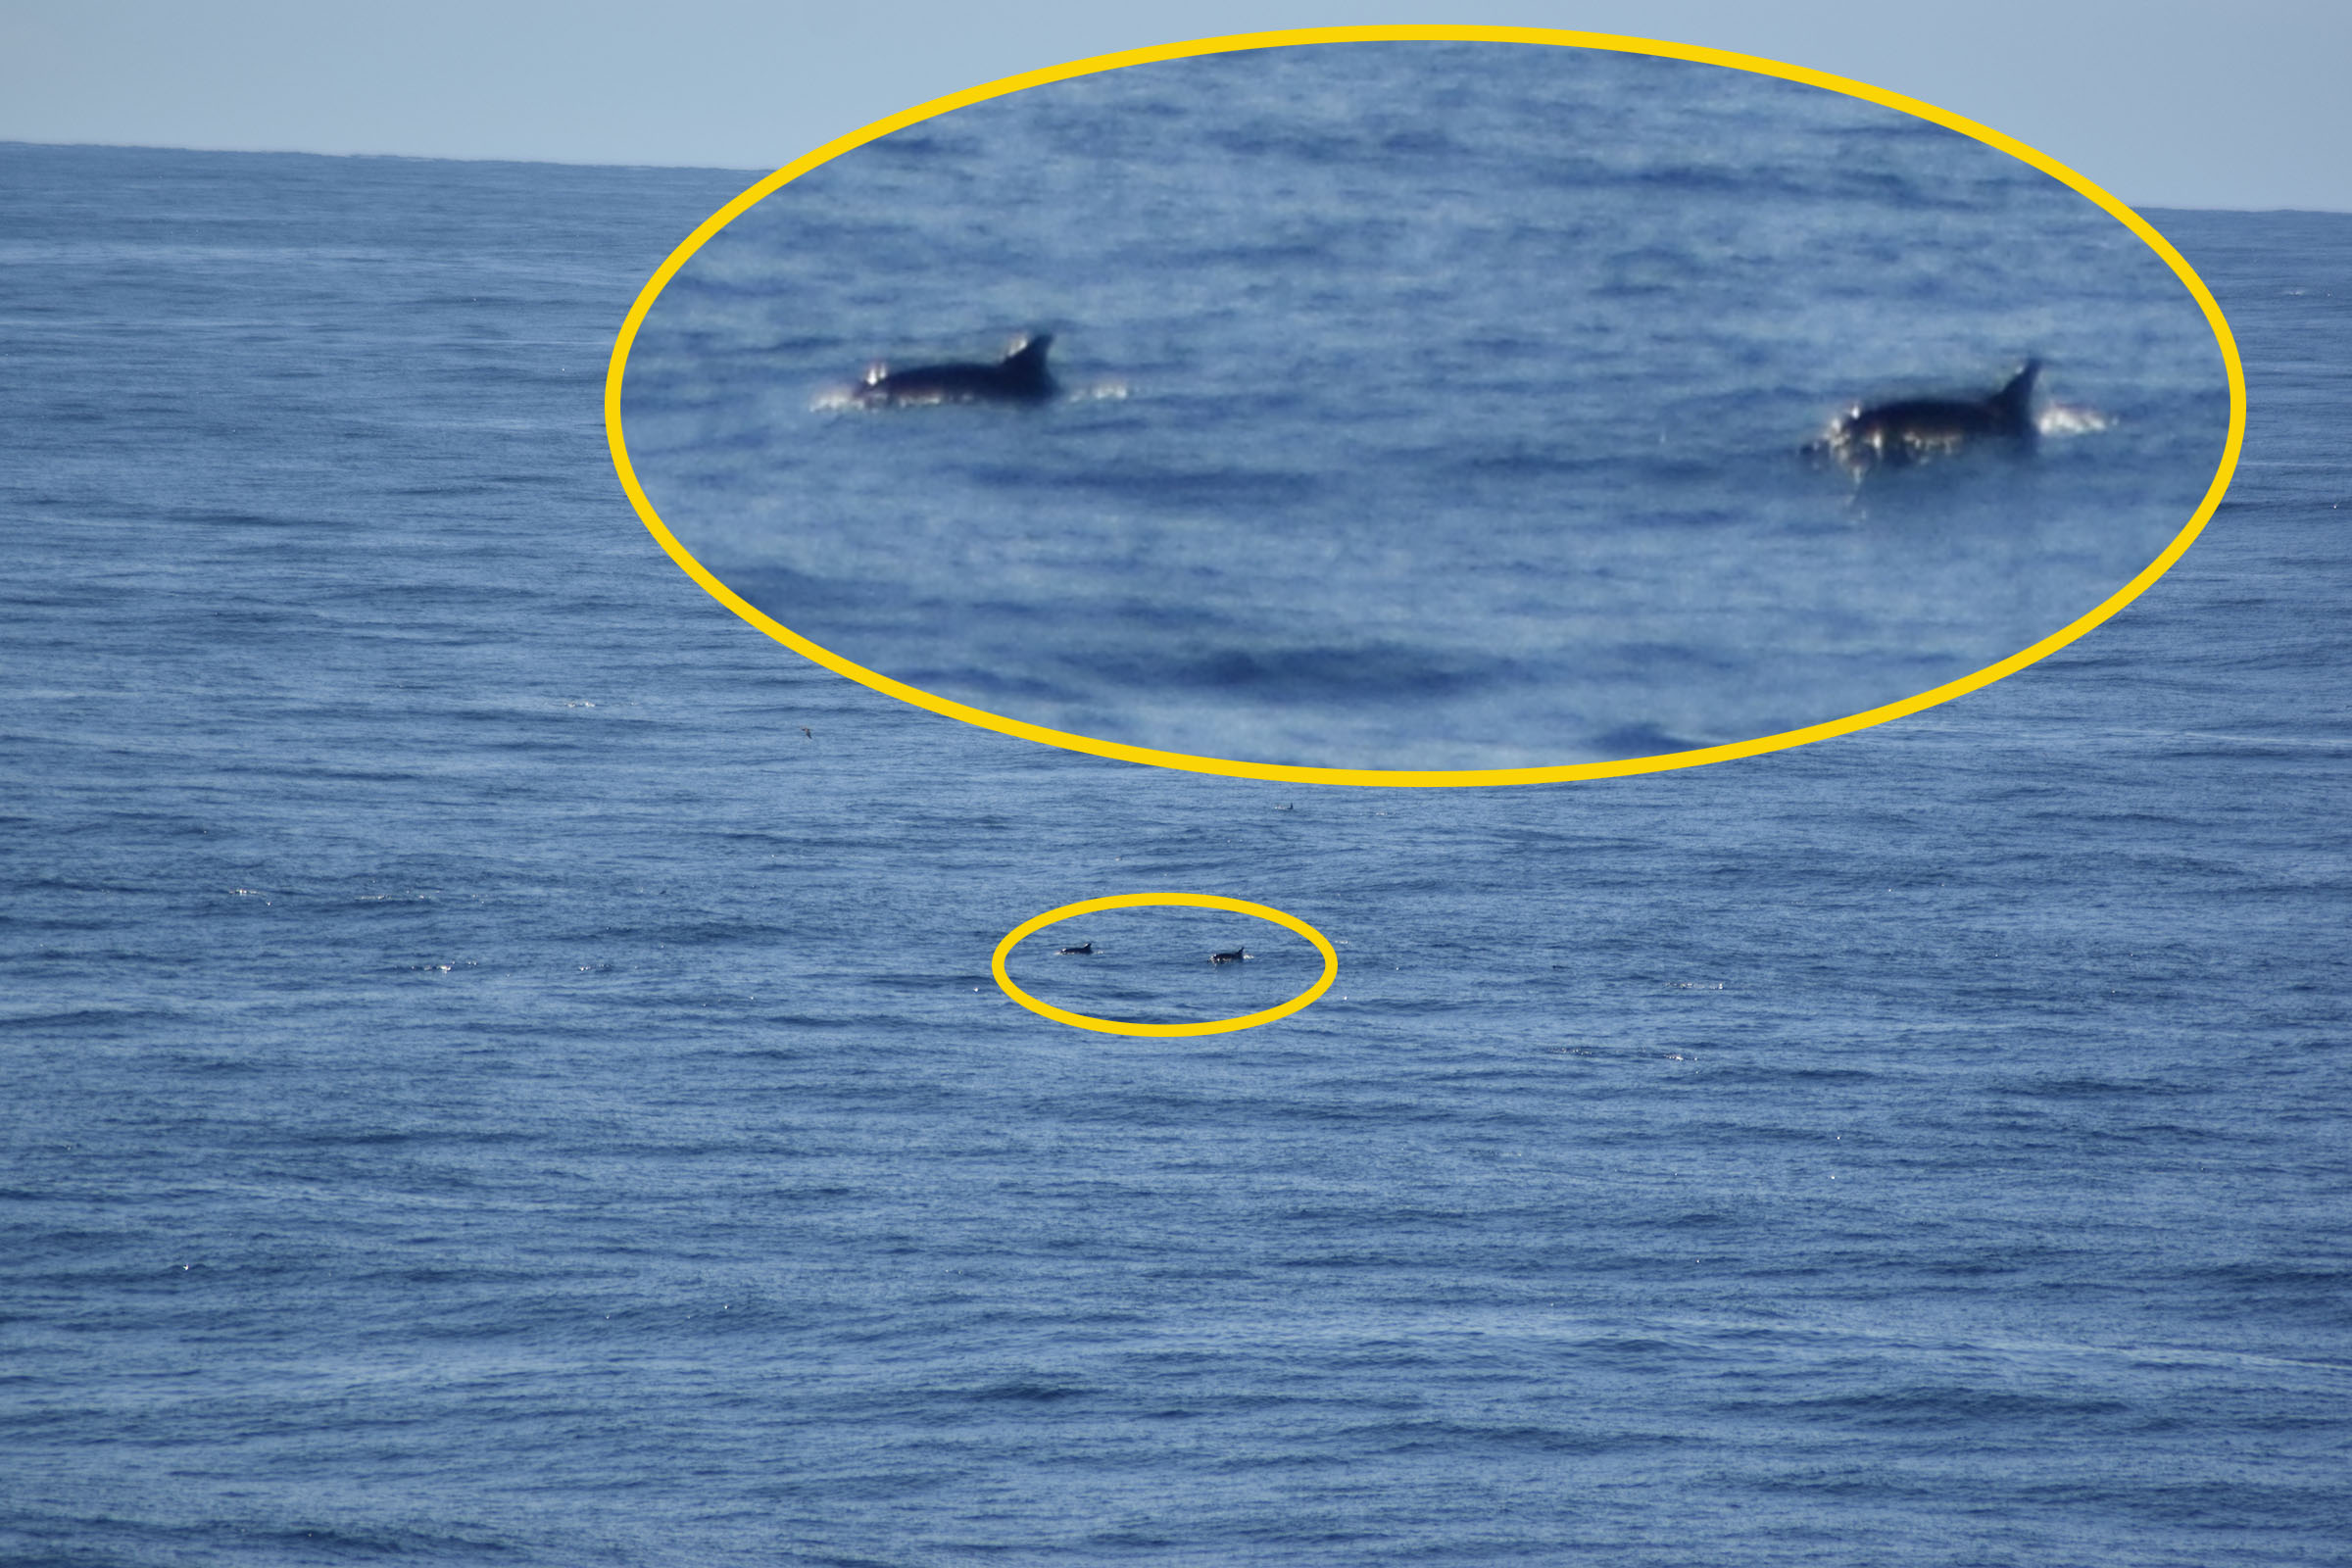 The marine mammal observers make sure that there are no cetaceans in-sight within a 500 m radius of the vessel. This means that sometimes the mammals are difficult to spot (Source: Erwin Guillon)